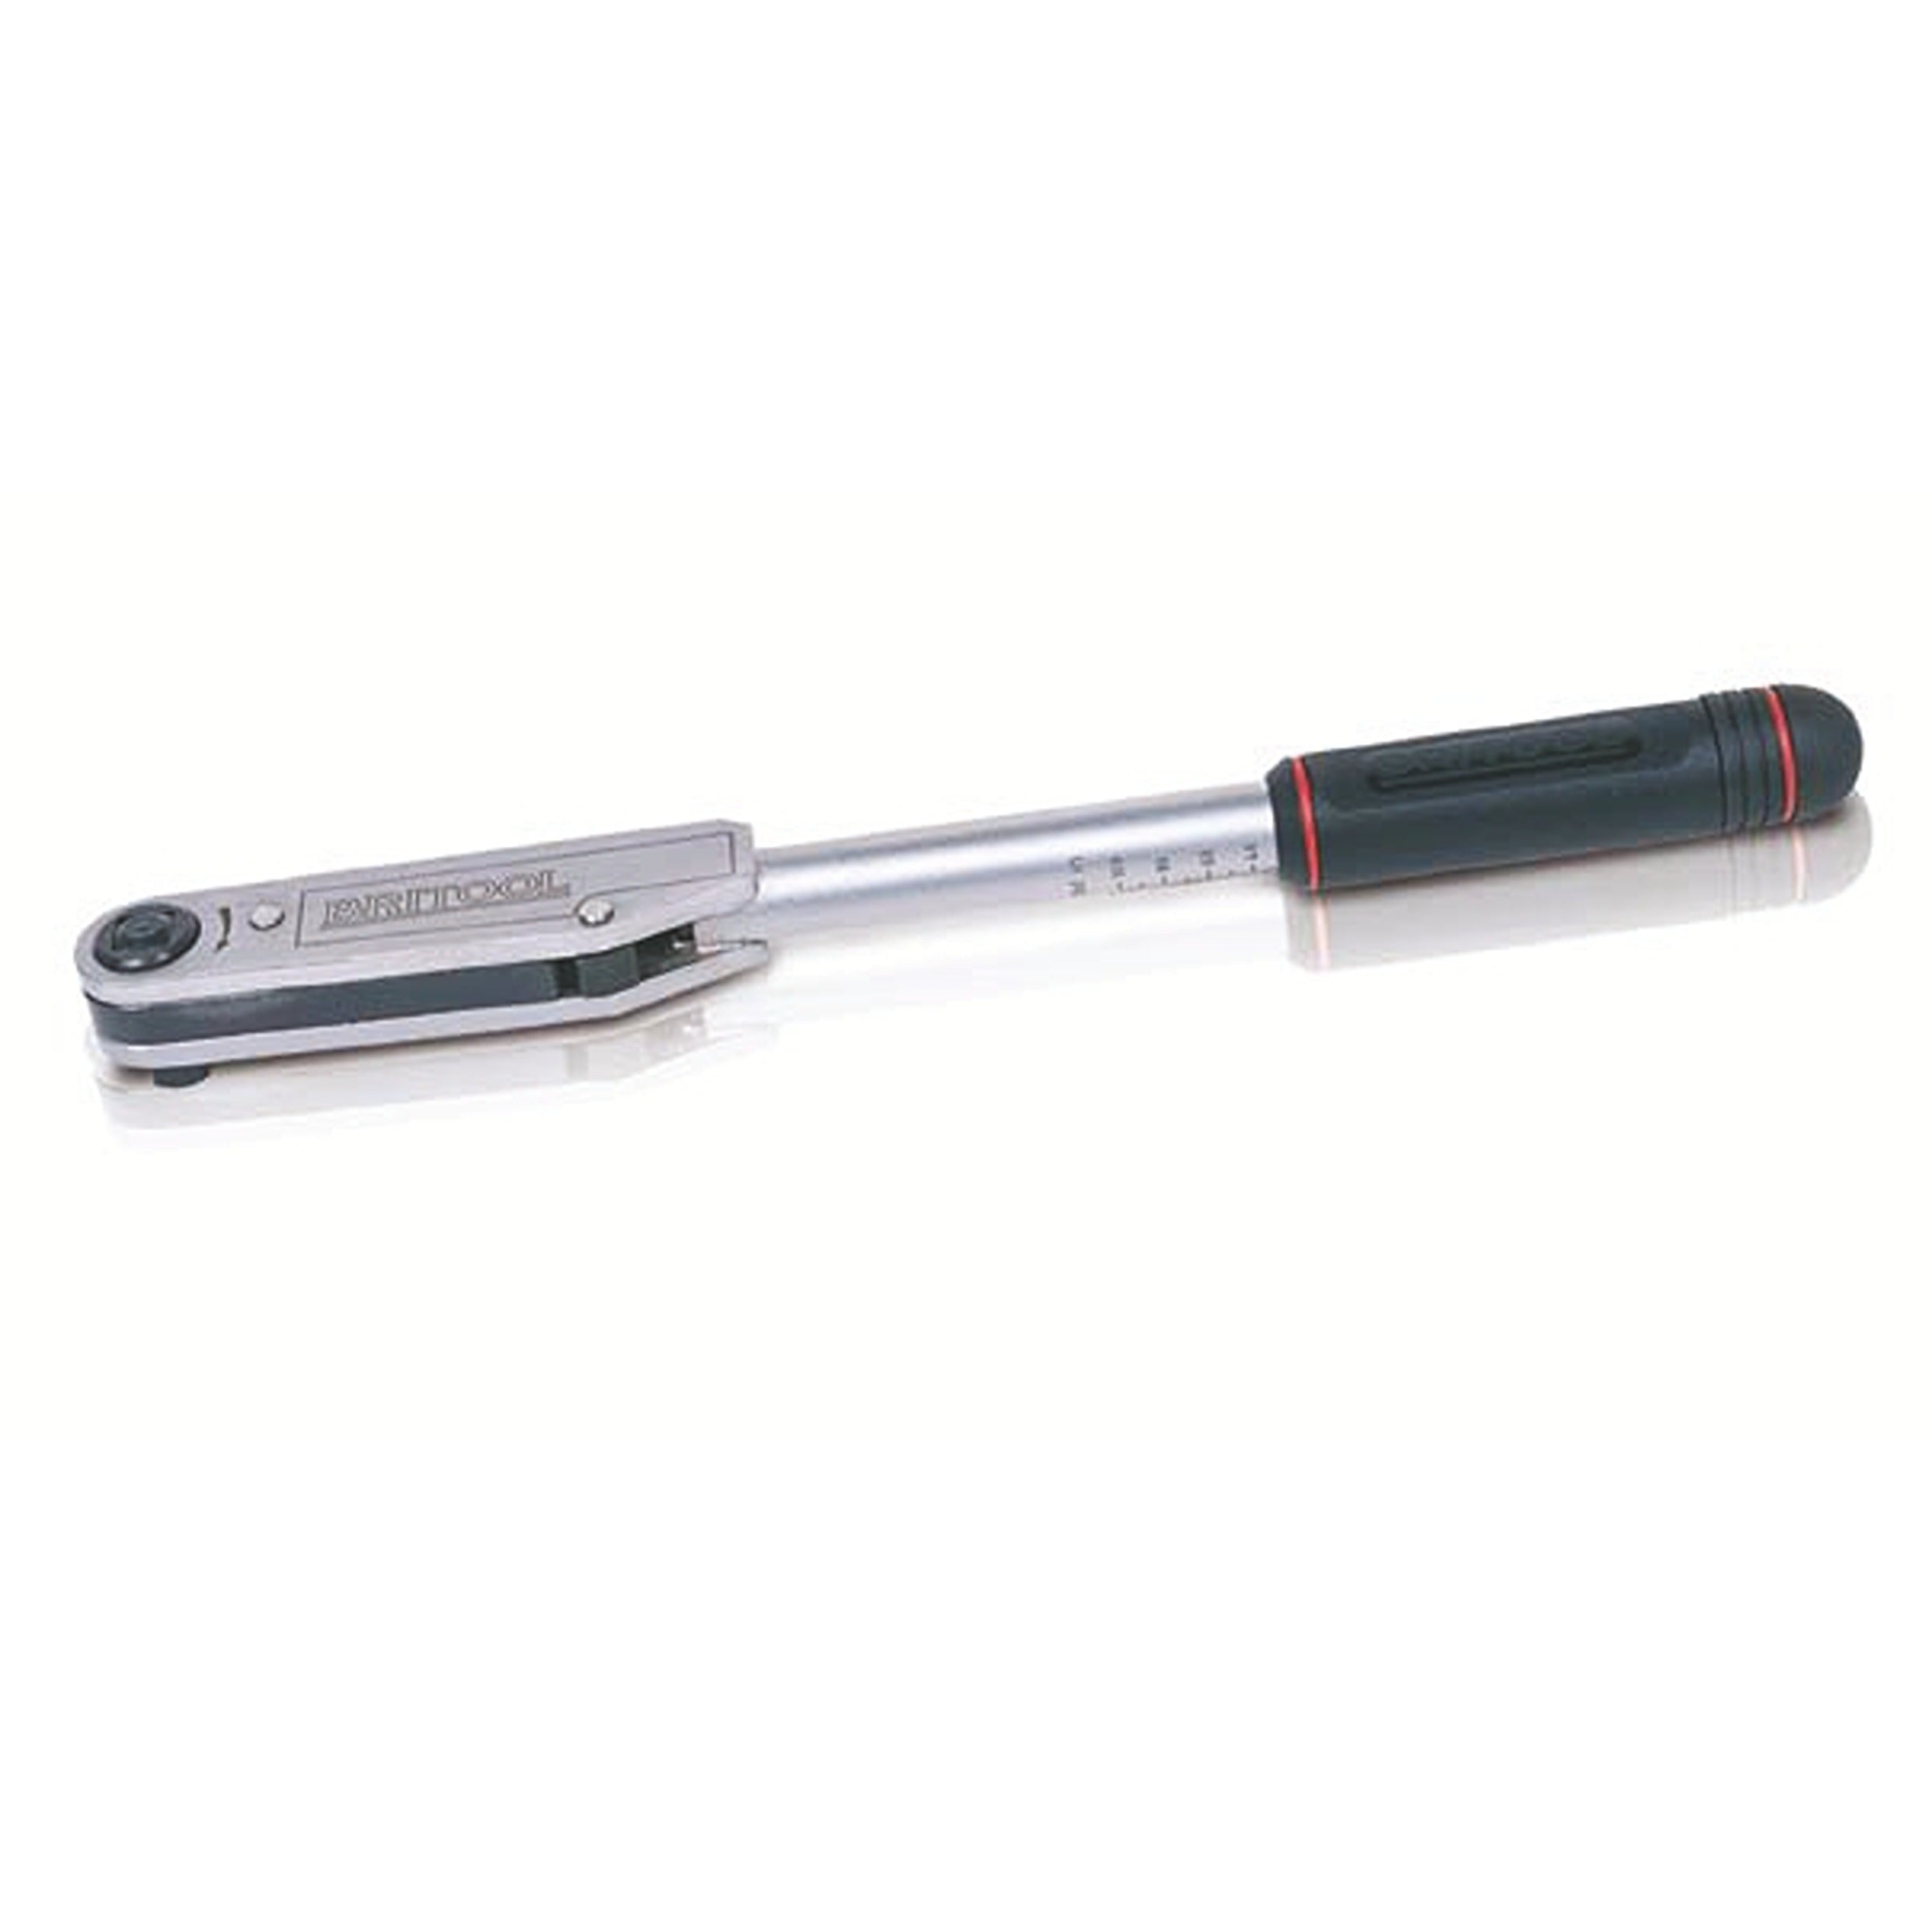 BRITOOL AVT100A 3/8" Torque Wrench Classic Mechanical 2.5-11 Nm - Premium 3/8" Torque Wrench from BRITOOL - Shop now at Yew Aik.